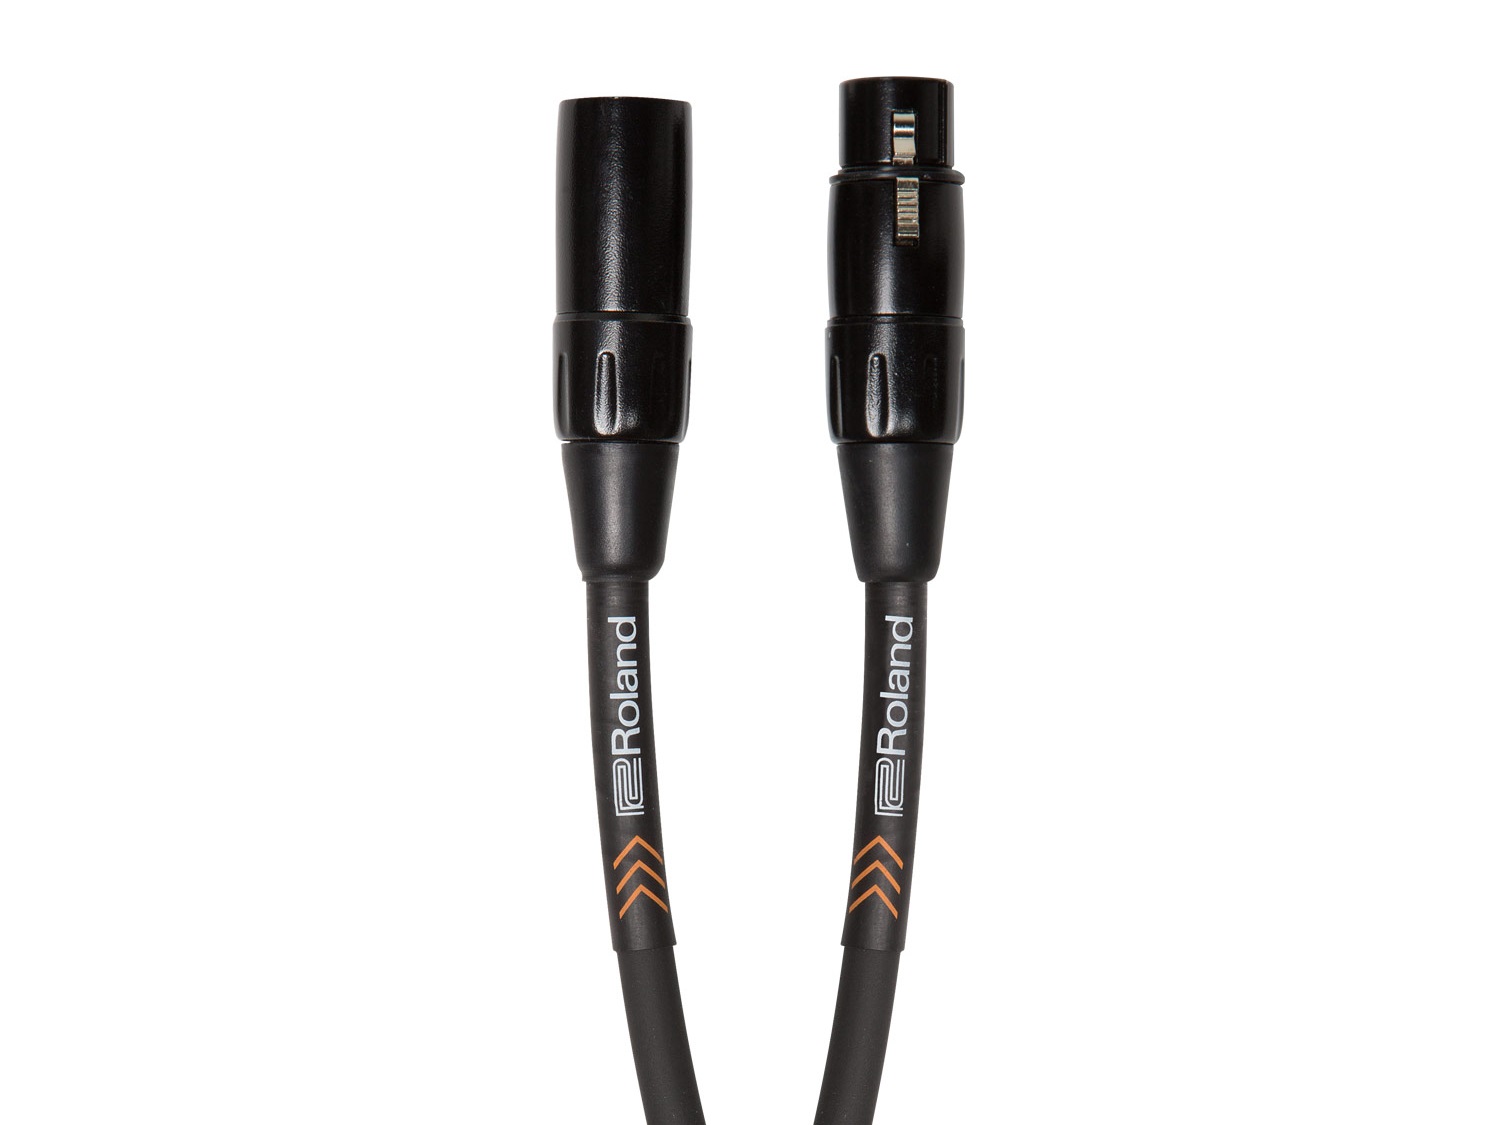 RMC-B50 50ft/15m Microphone Cable (Black Series) by Roland